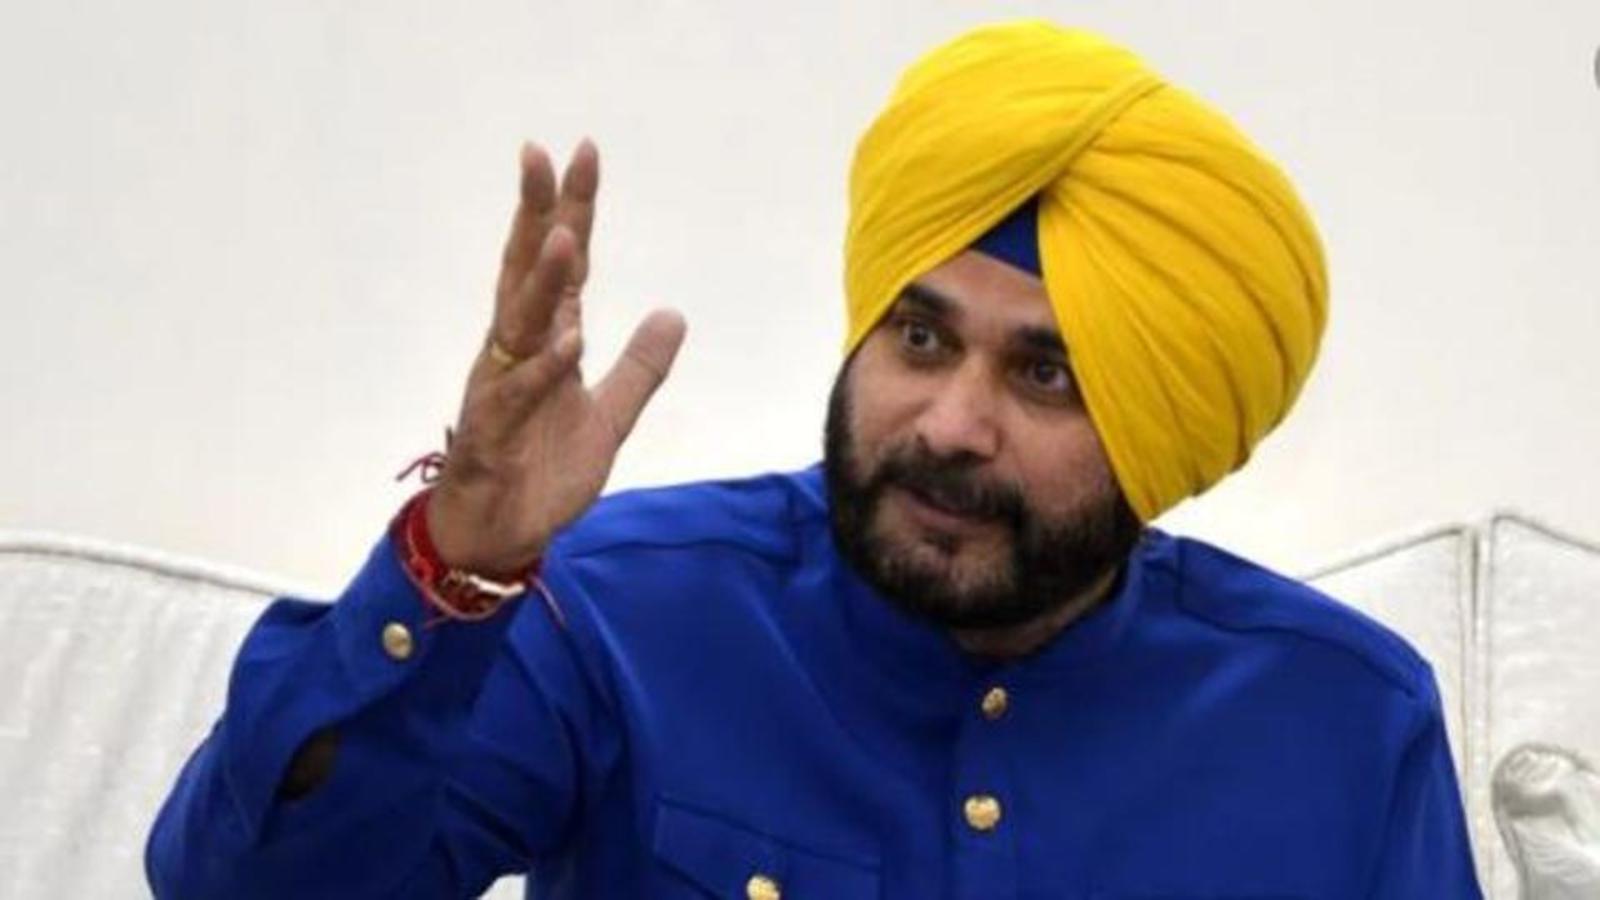 Five possible reasons why Navjot Singh Sidhu may have quit - Hindustan Times